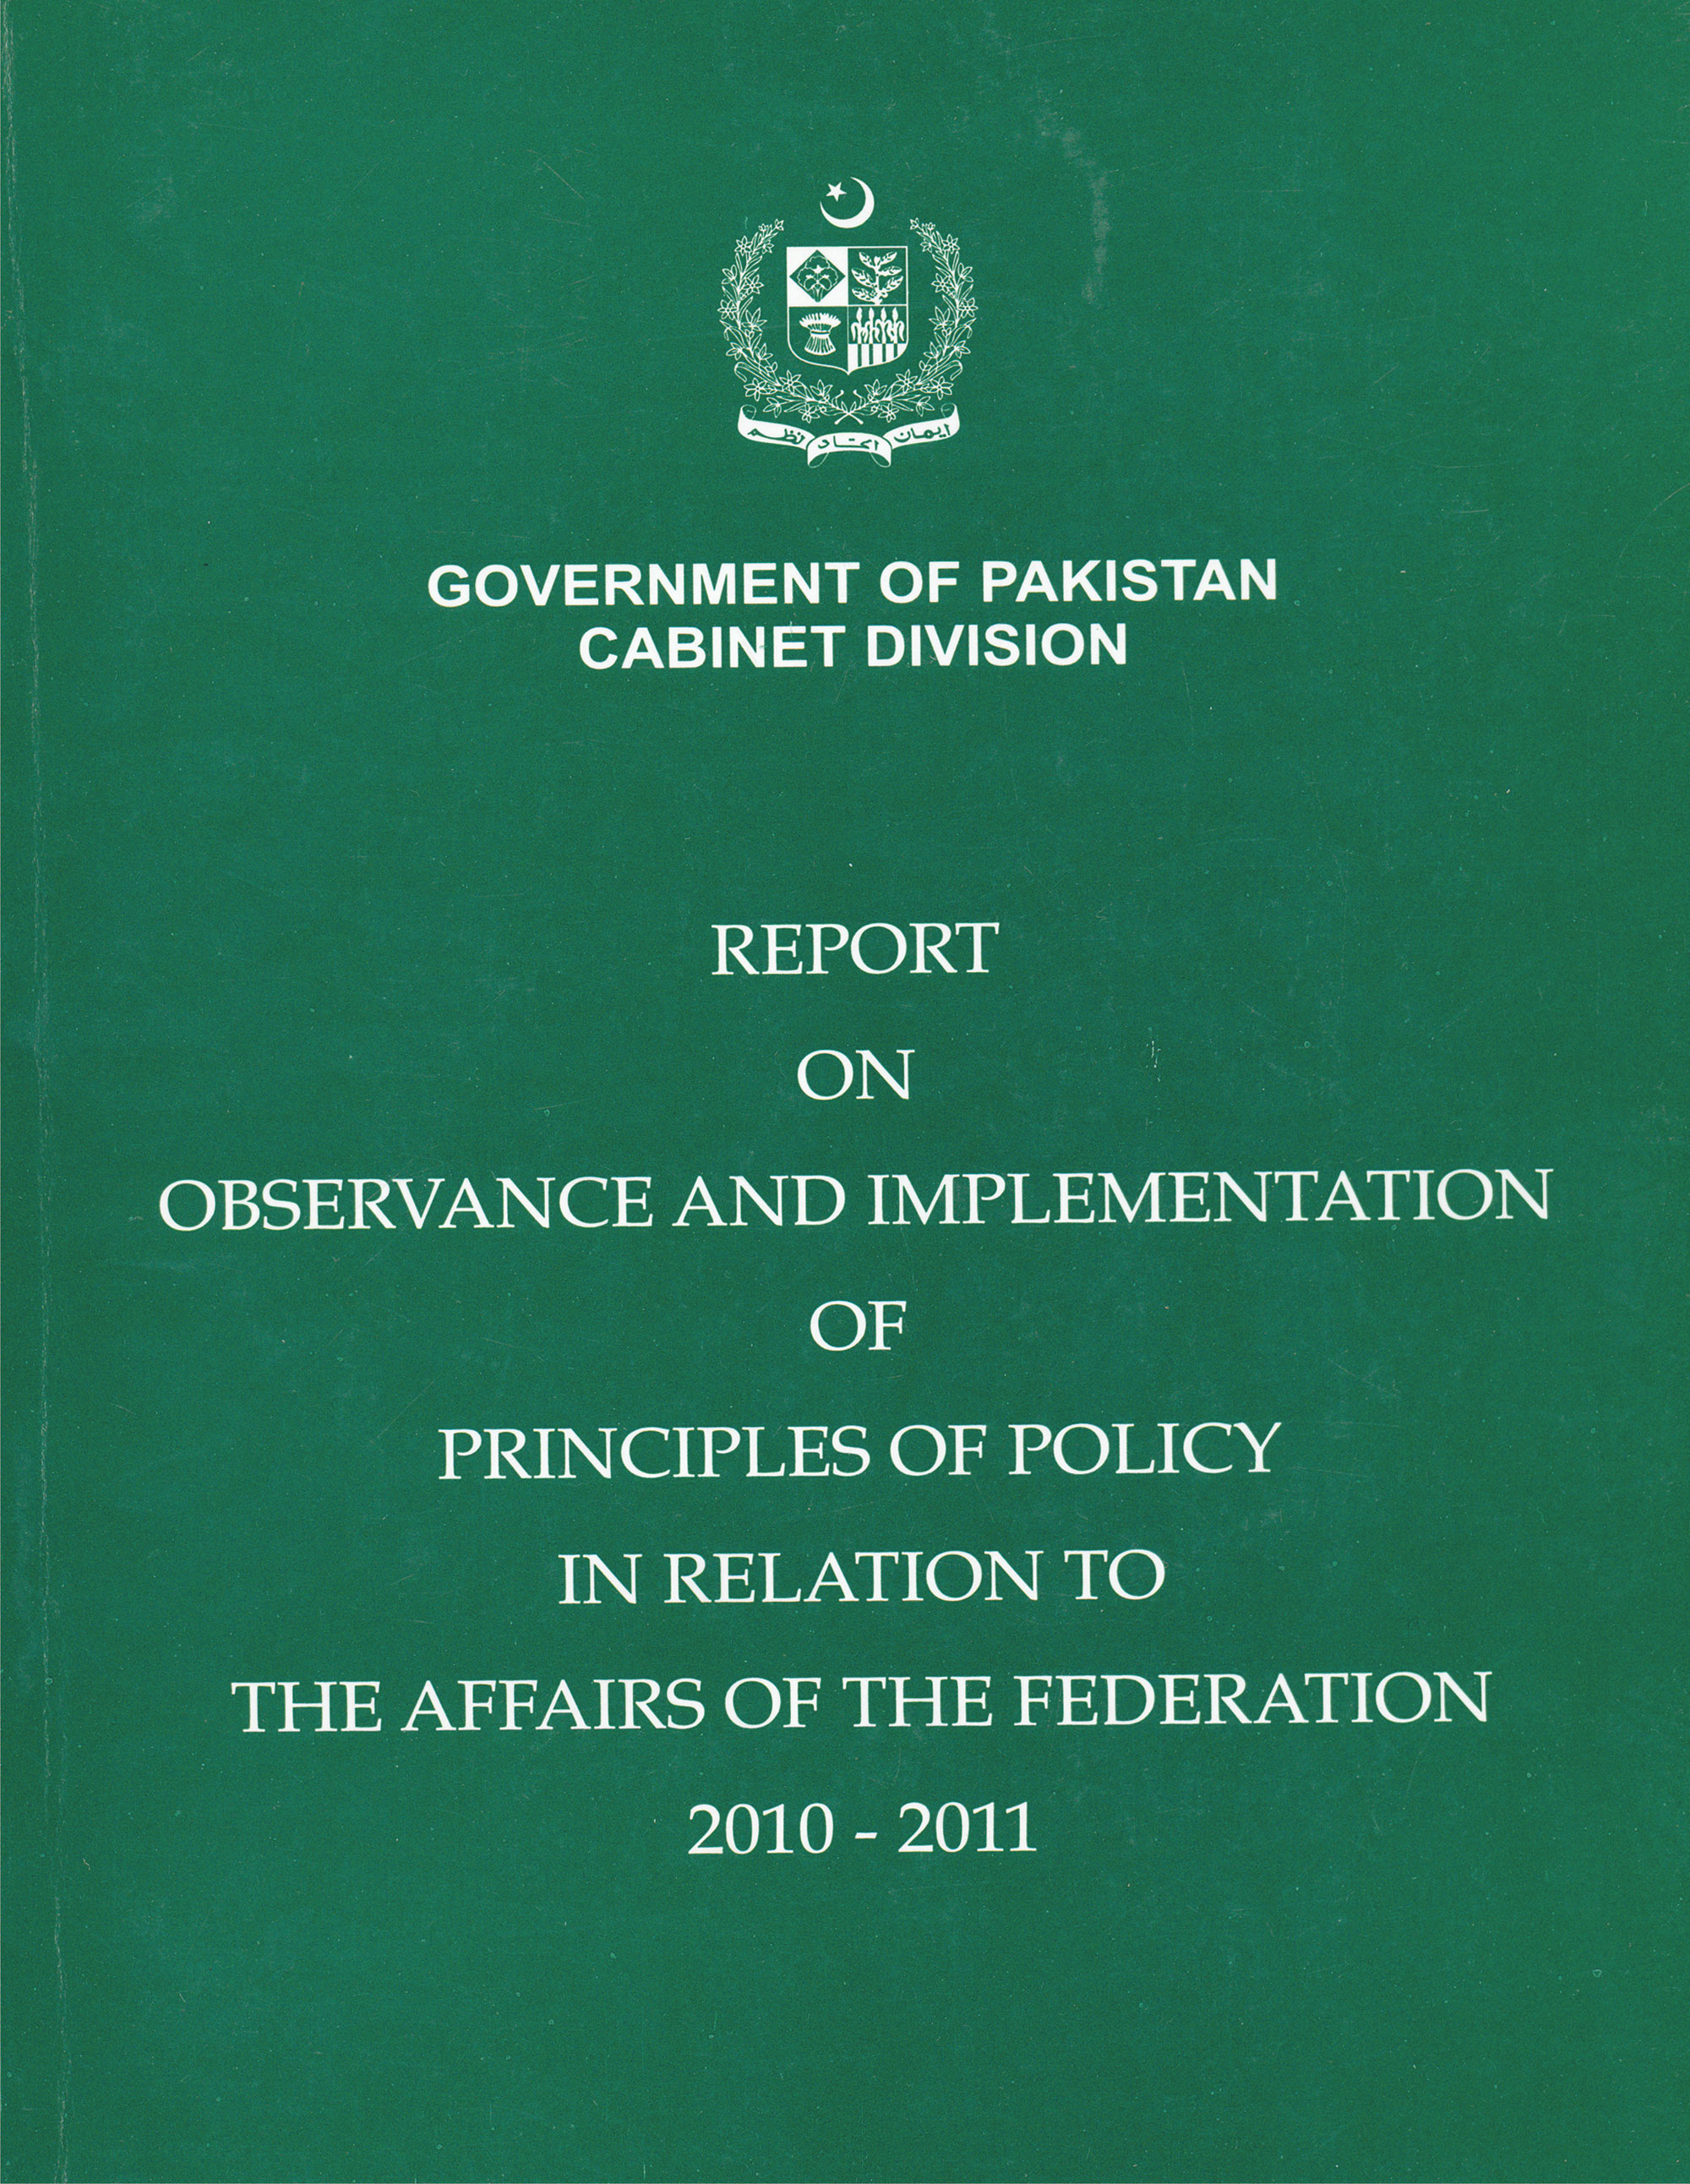 Report on Observance and Implementation of Principles of Policy: An Evaluation